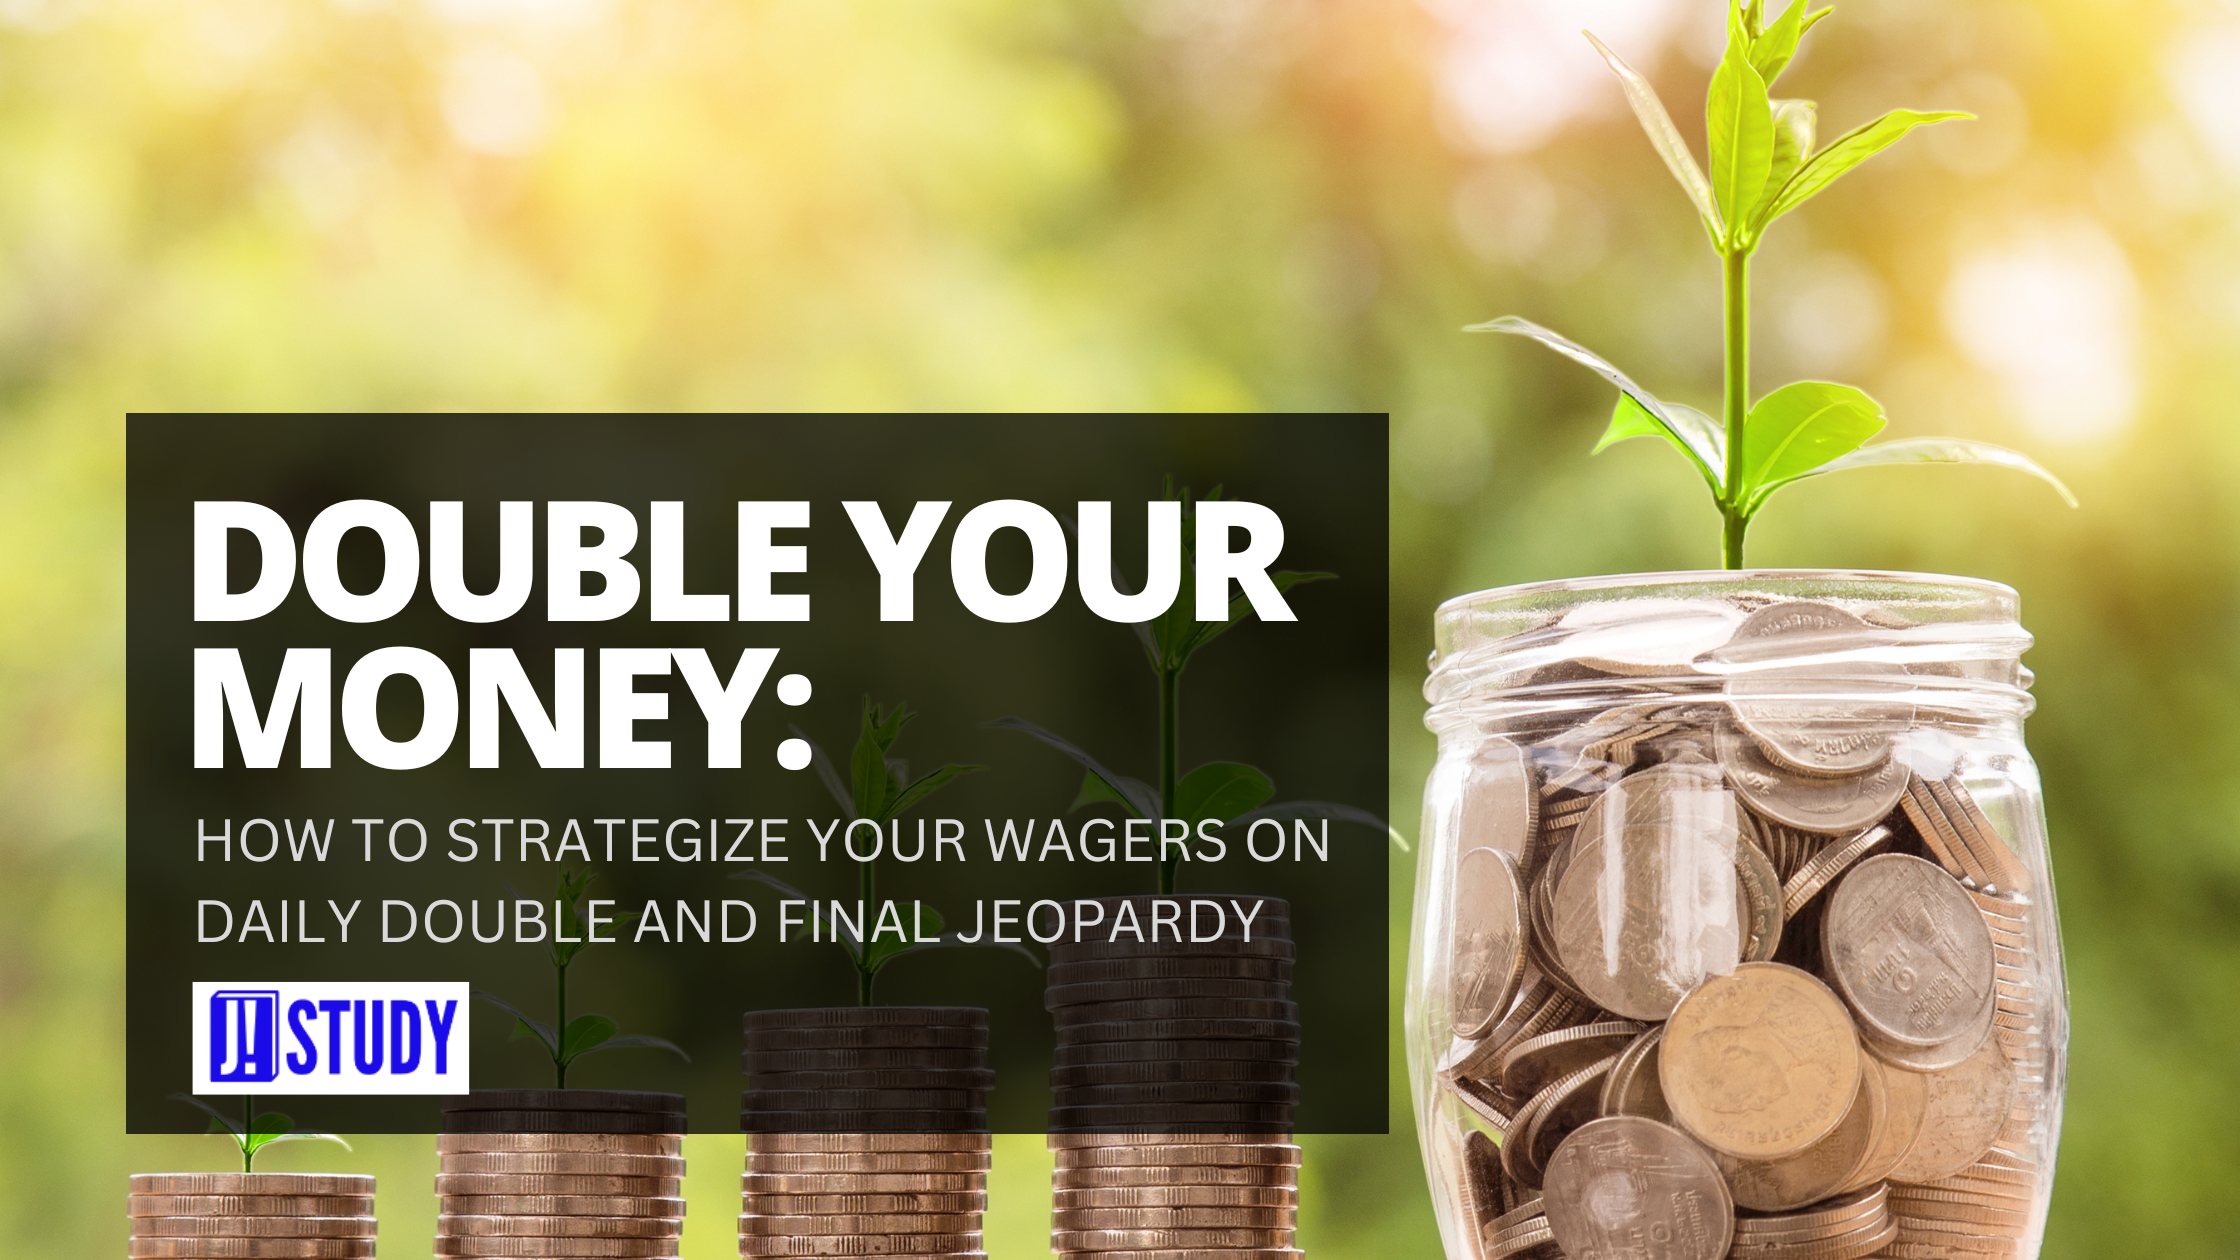 Double Your Money: How to Strategize Your Wagers on Daily Double and Final Jeopardy